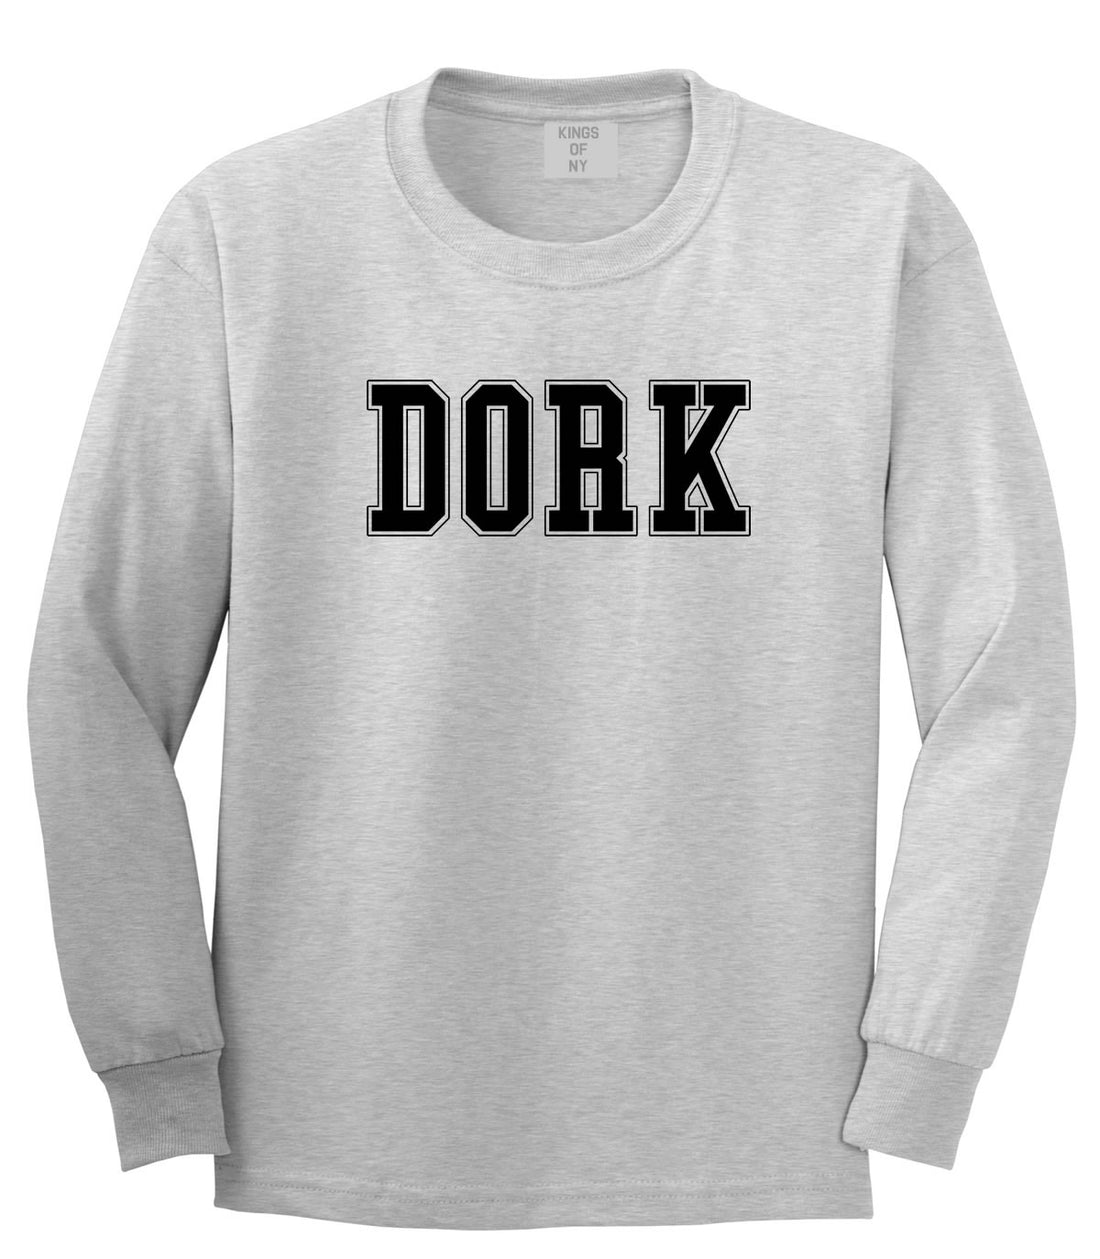 Dork College Style Long Sleeve T-Shirt in Grey By Kings Of NY